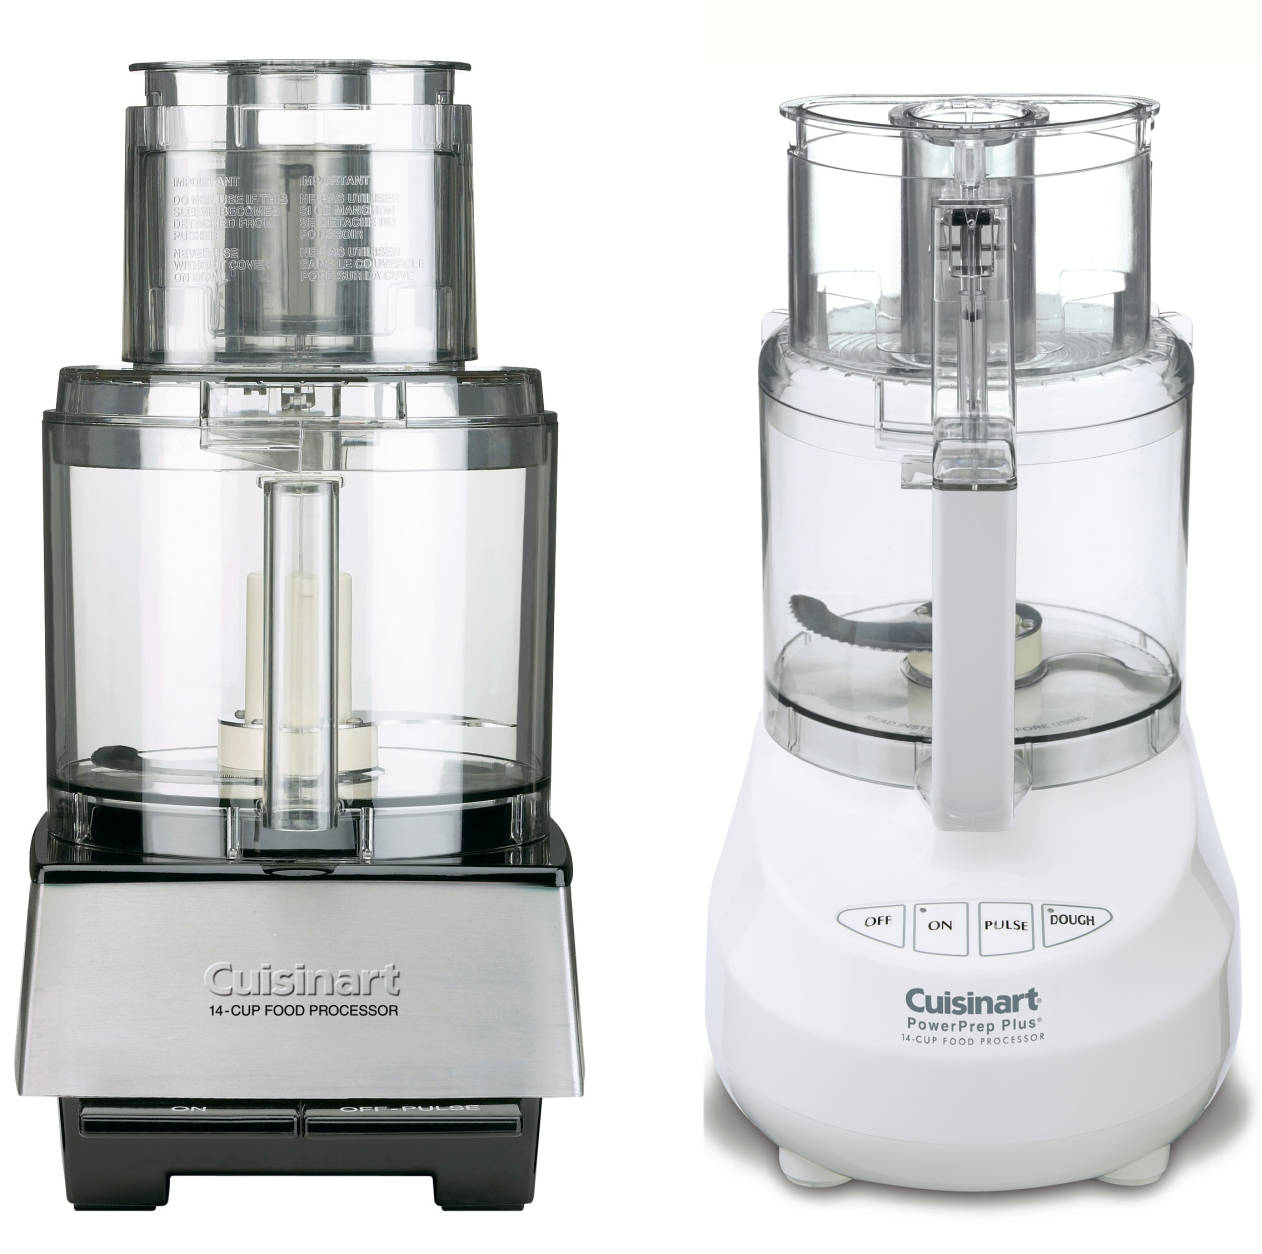 22 Models of Cuisinart Food Processors Recalled After Reports of